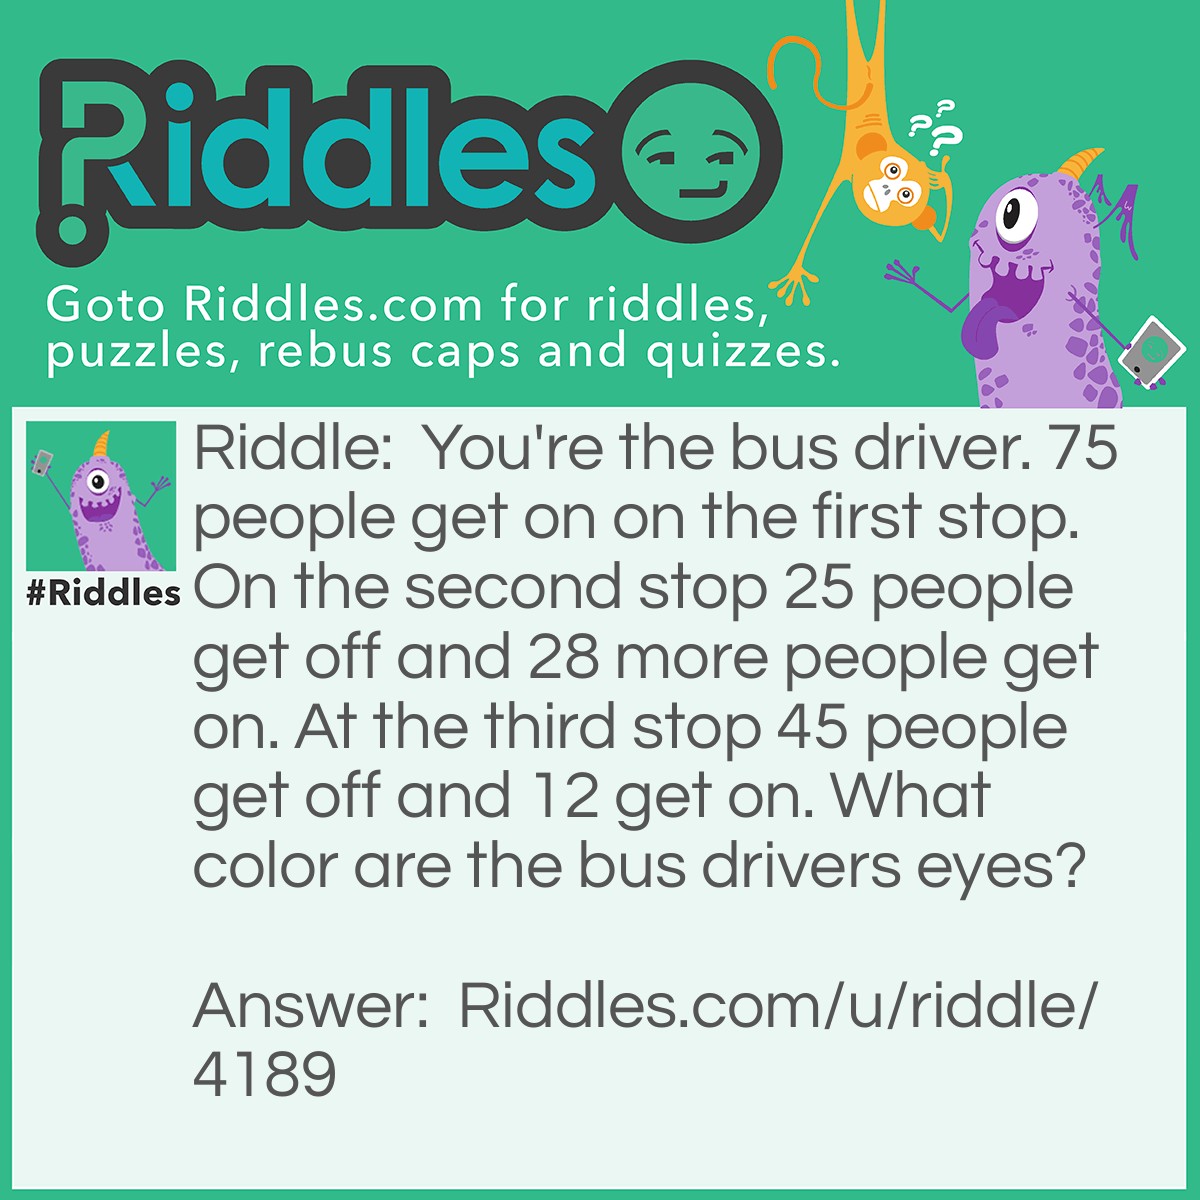 Riddle: You're the bus driver. 75 people get on on the first stop. On the second stop 25 people get off and 28 more people get on. At the third stop 45 people get off and 12 get on. What color are the bus drivers eyes? Answer: Whatever color your eyes are( you are the bus driver).